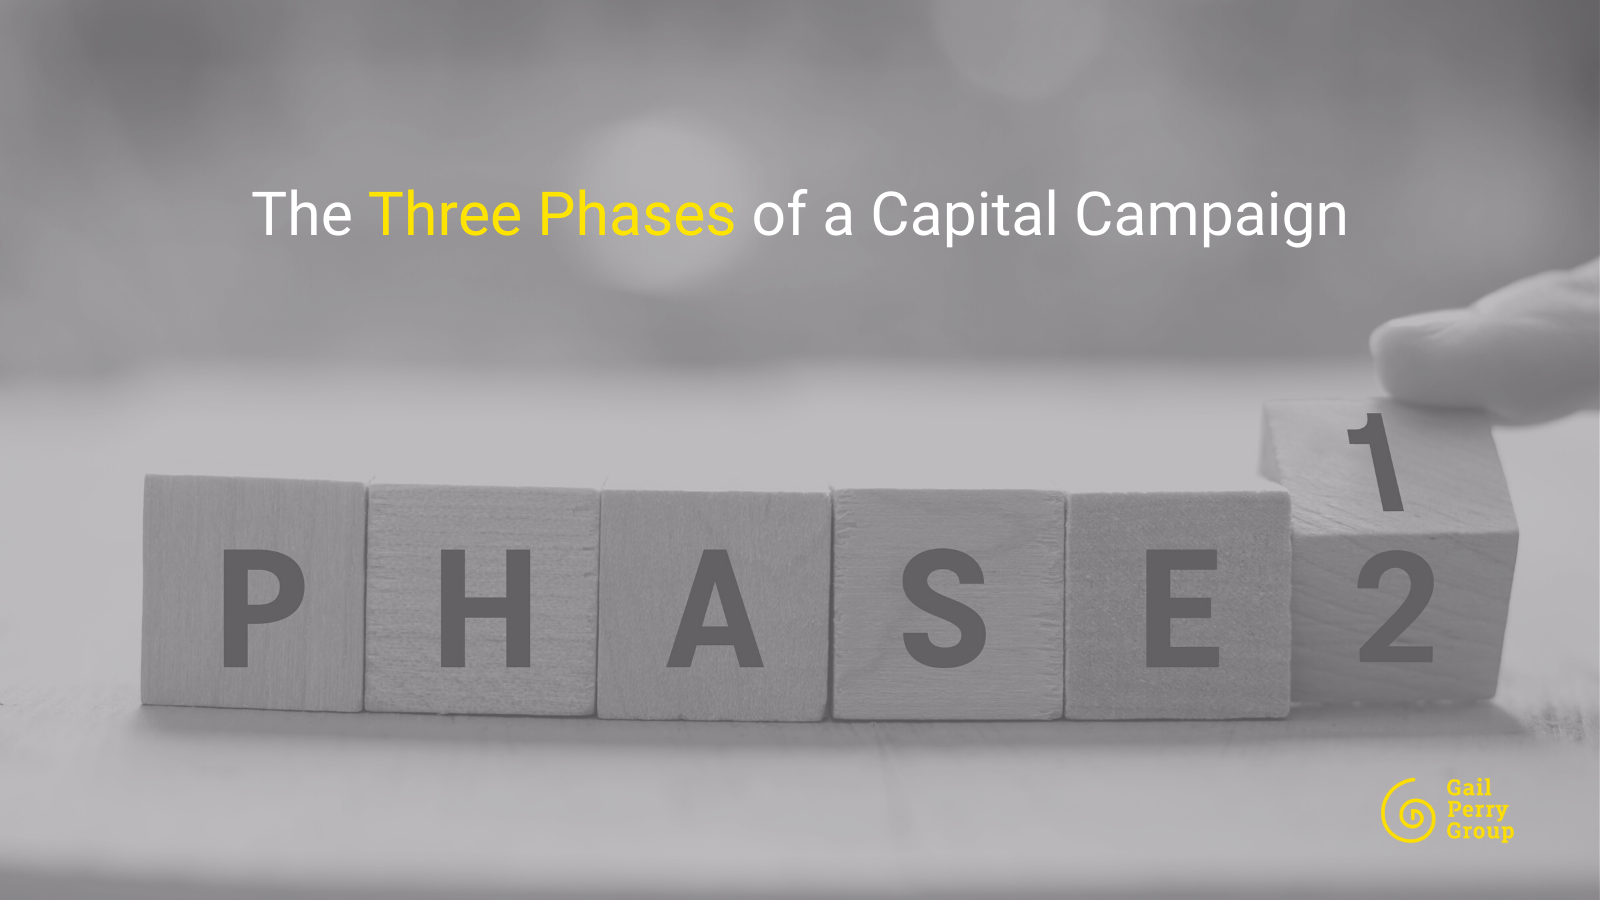 The Three Phases of a Capital Campaign